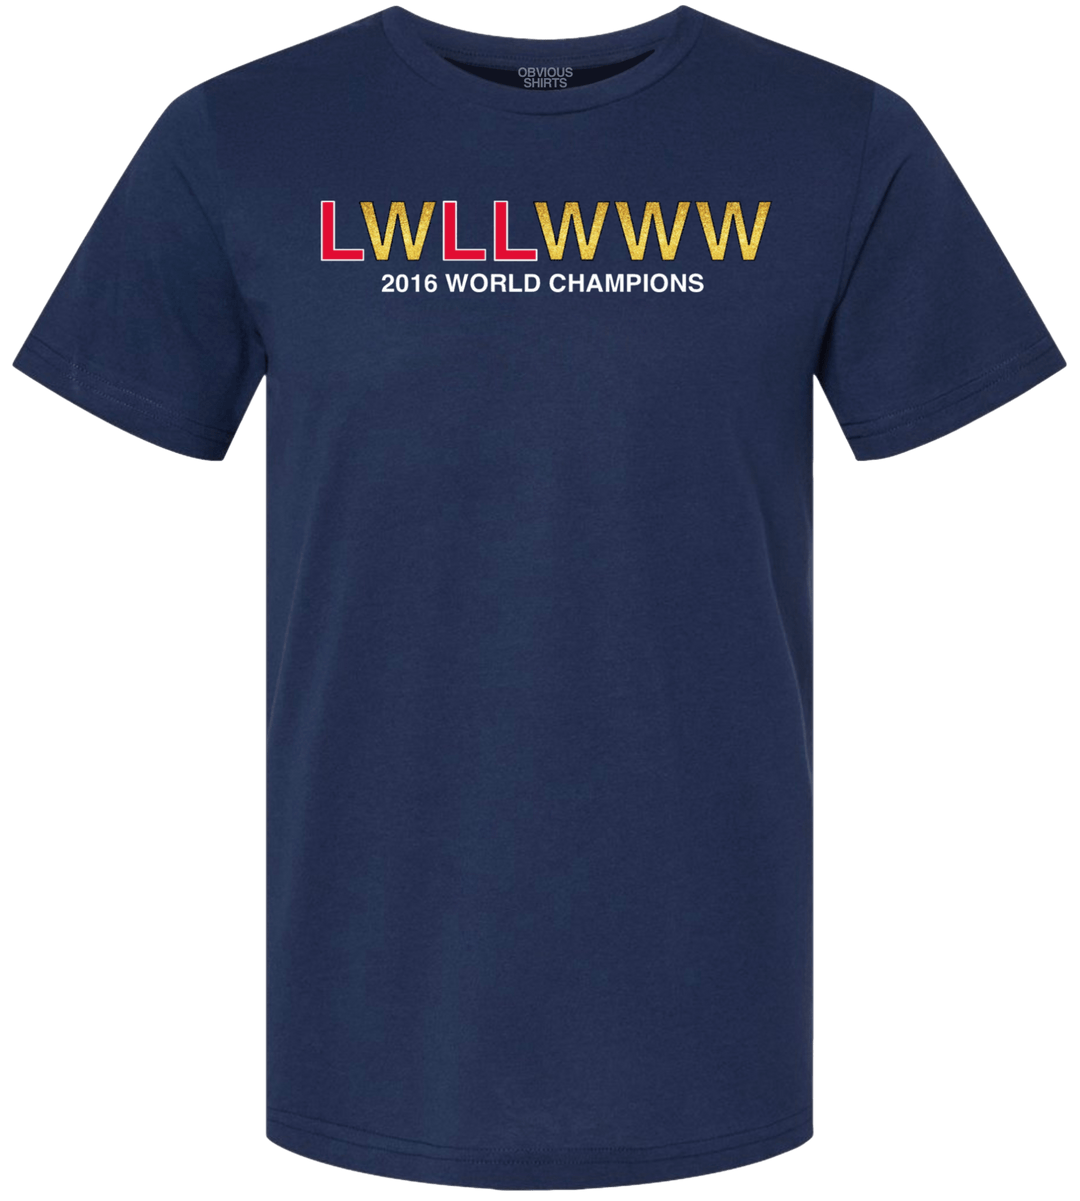 LWLLWWW. (ANNIVERSARY EDITION) - OBVIOUS SHIRTS